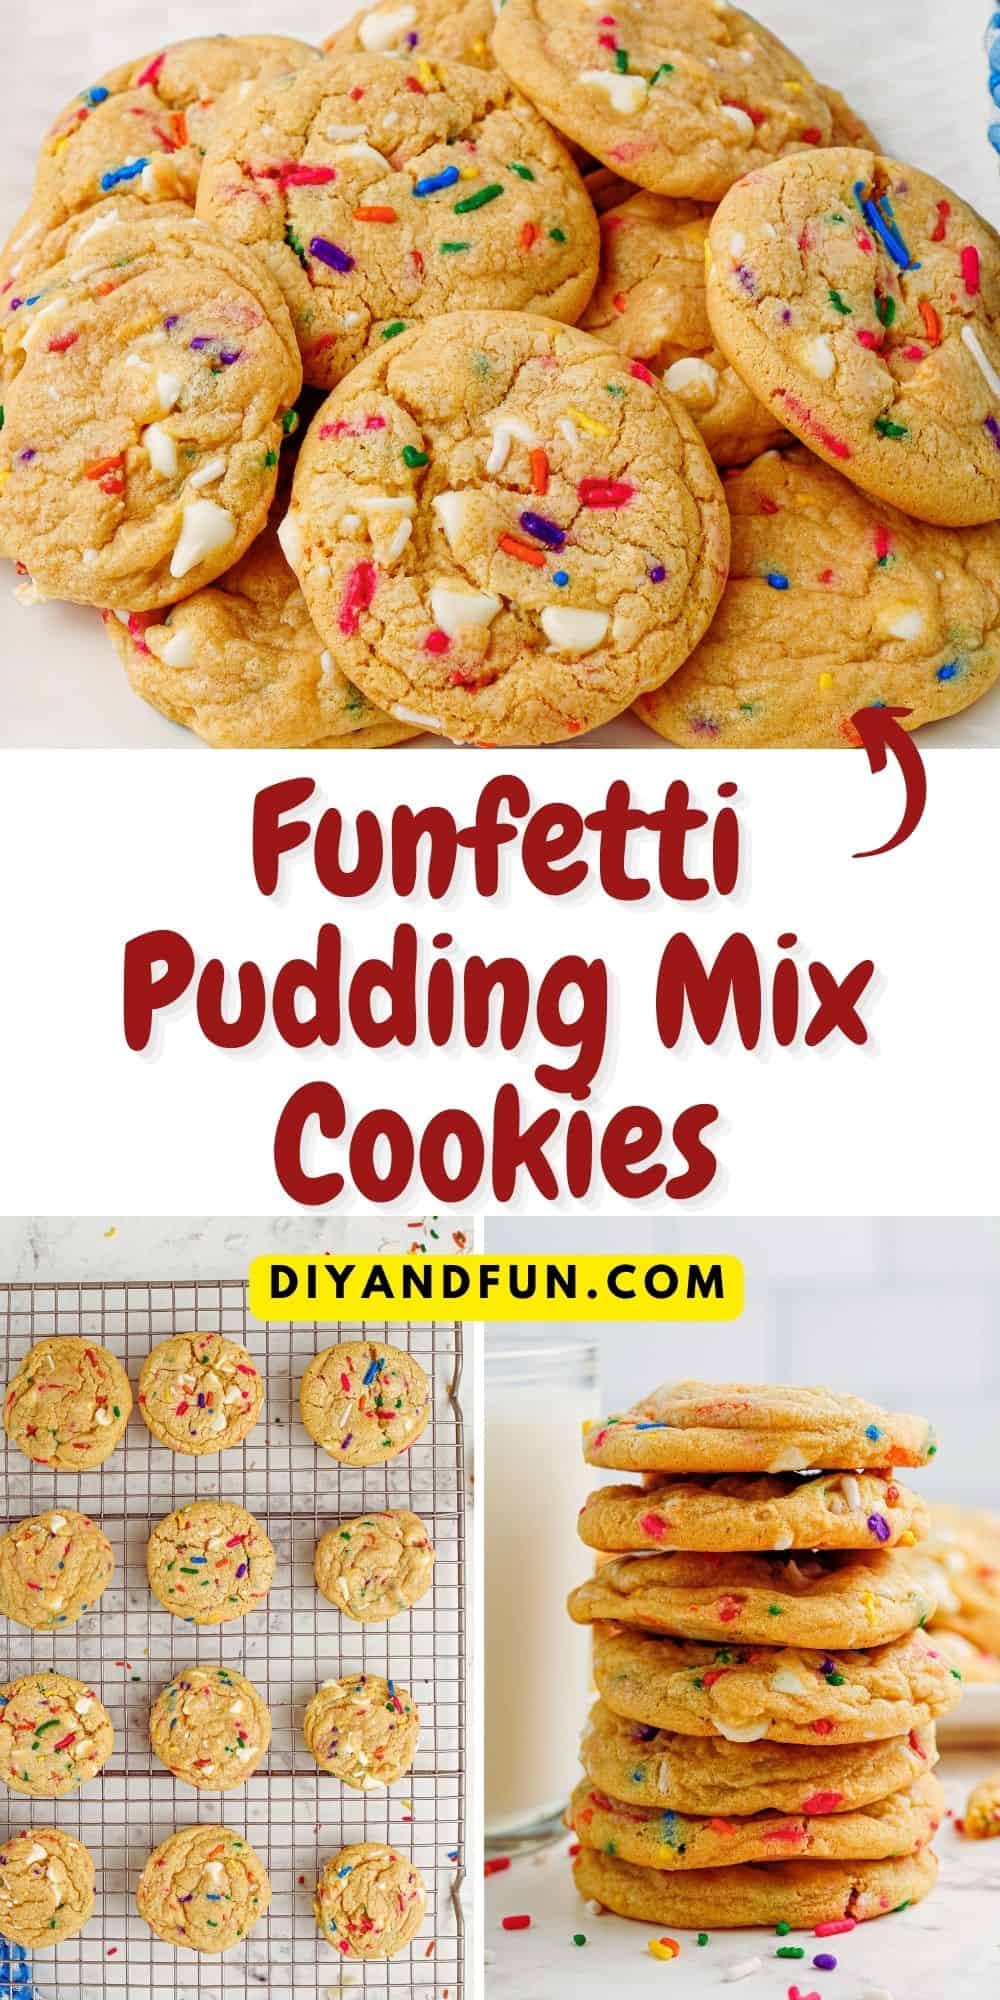 Funfetti Pudding Mix Cookies, an easy and delicious dessert or snack recipe aka cake batter cookies, soft and chewy colorful cookies.